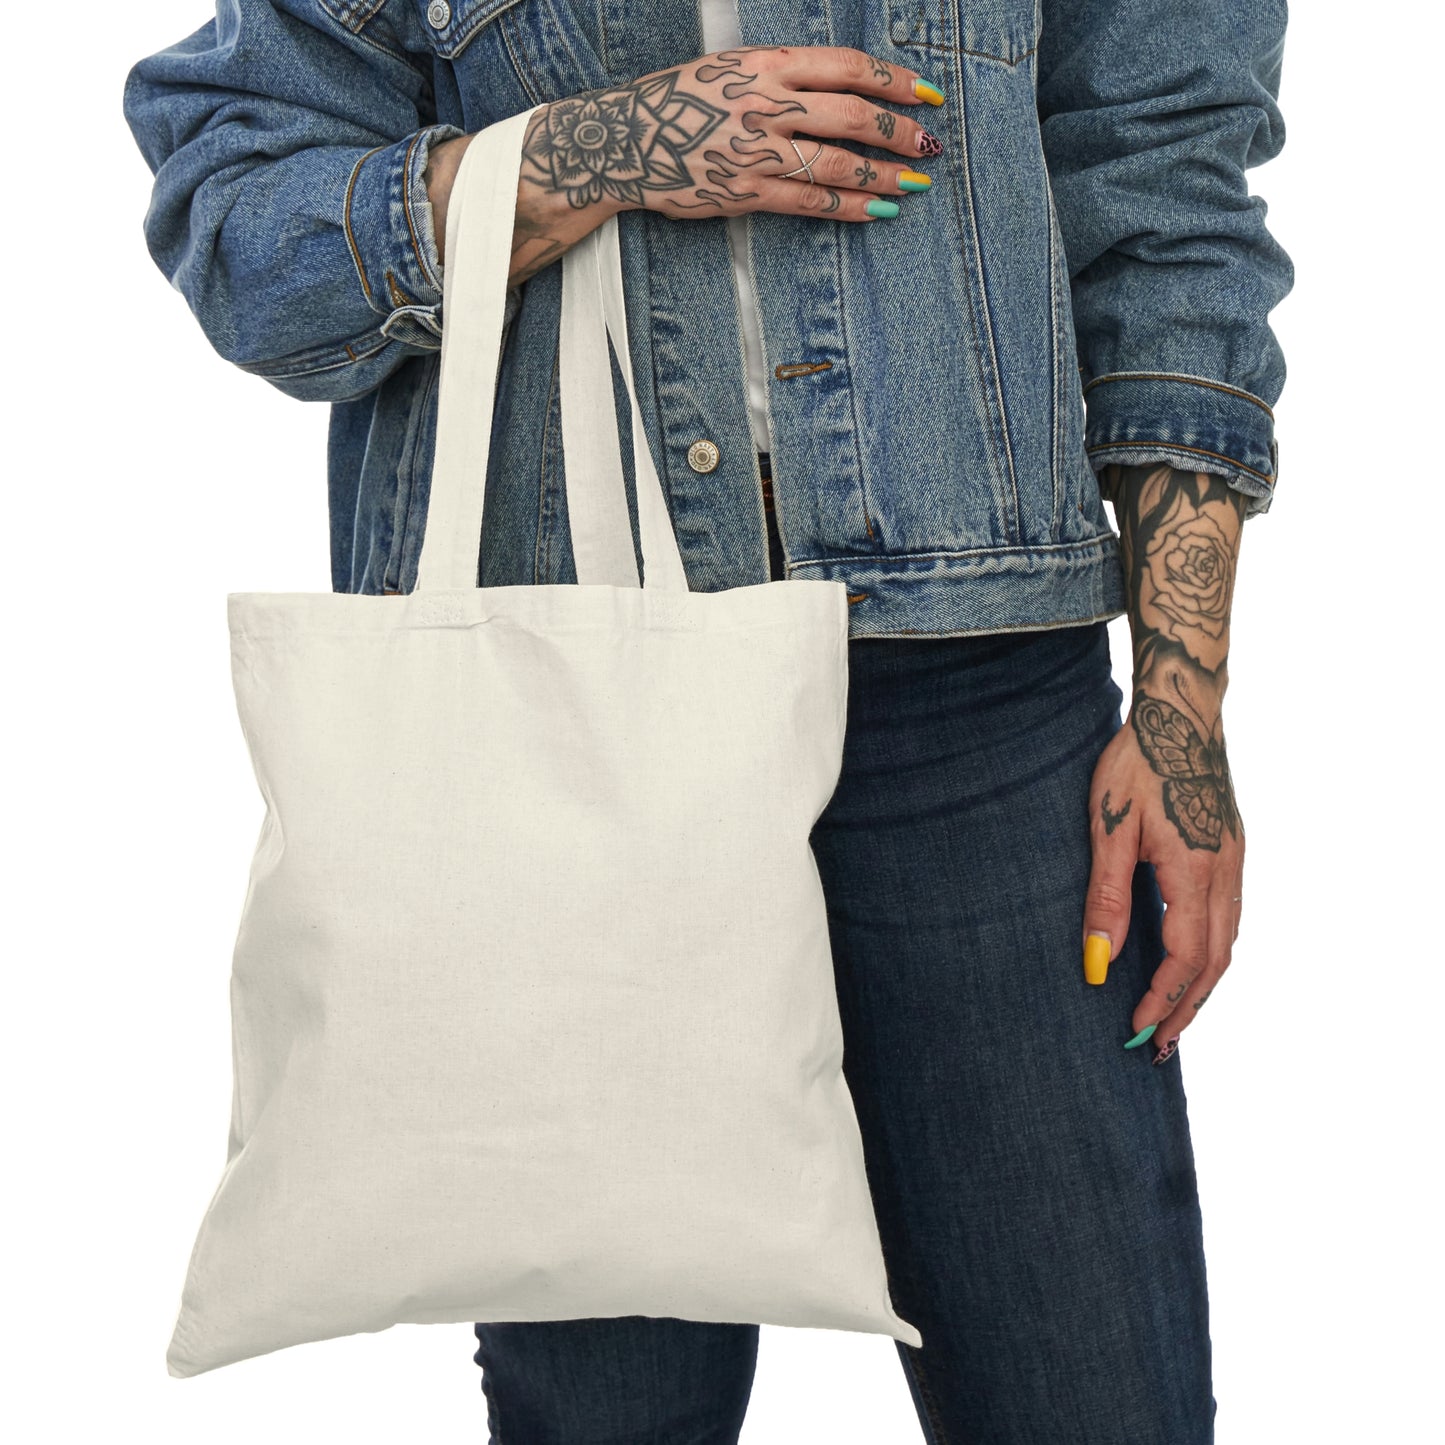 Love's Prophecy - Natural Tote Bag